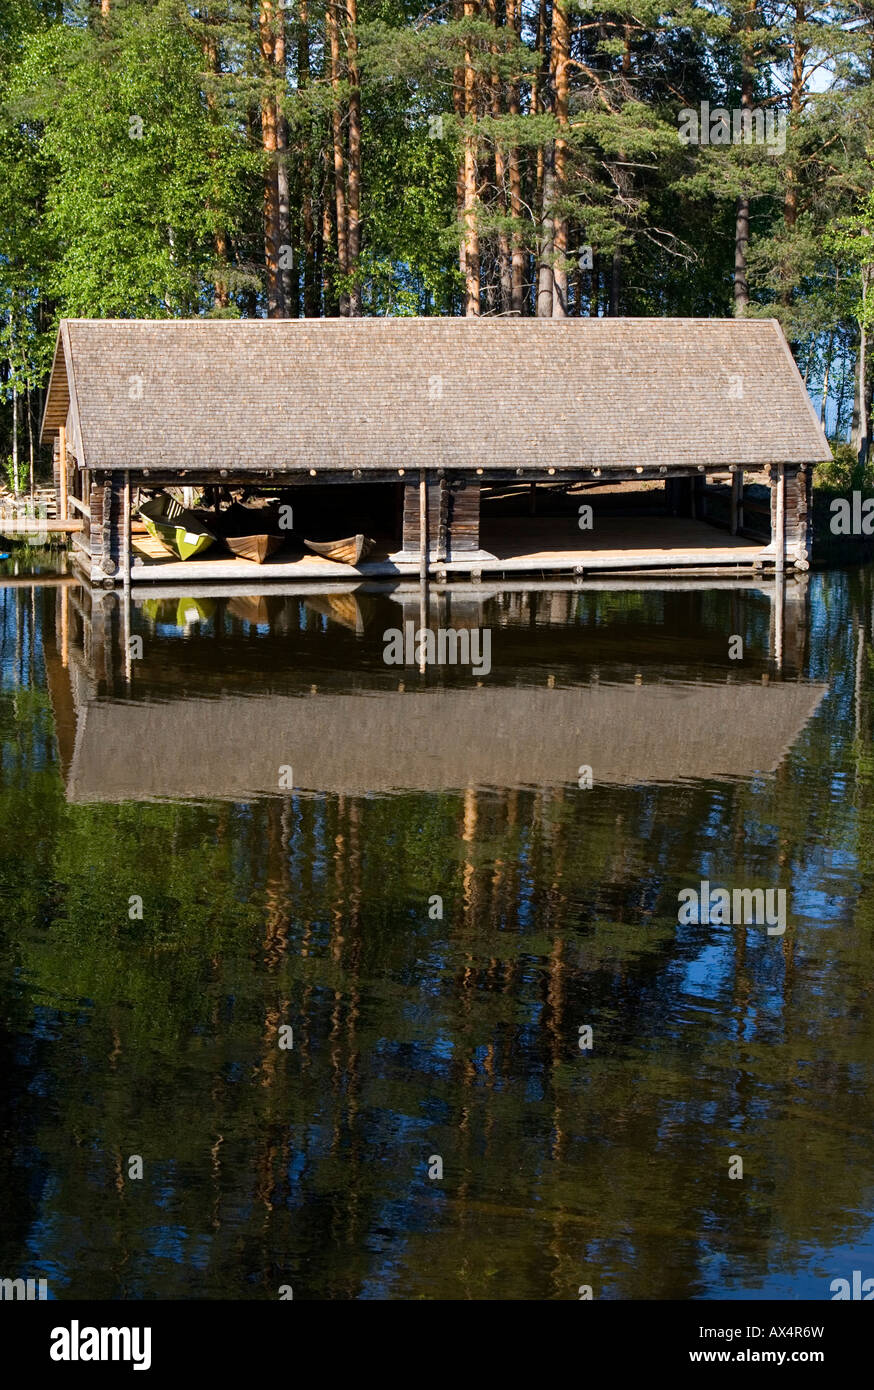 Wooden old-fashioned boathouse with rowboats / skiffs / dinghies at lake Konnevesi Finland Stock Photo